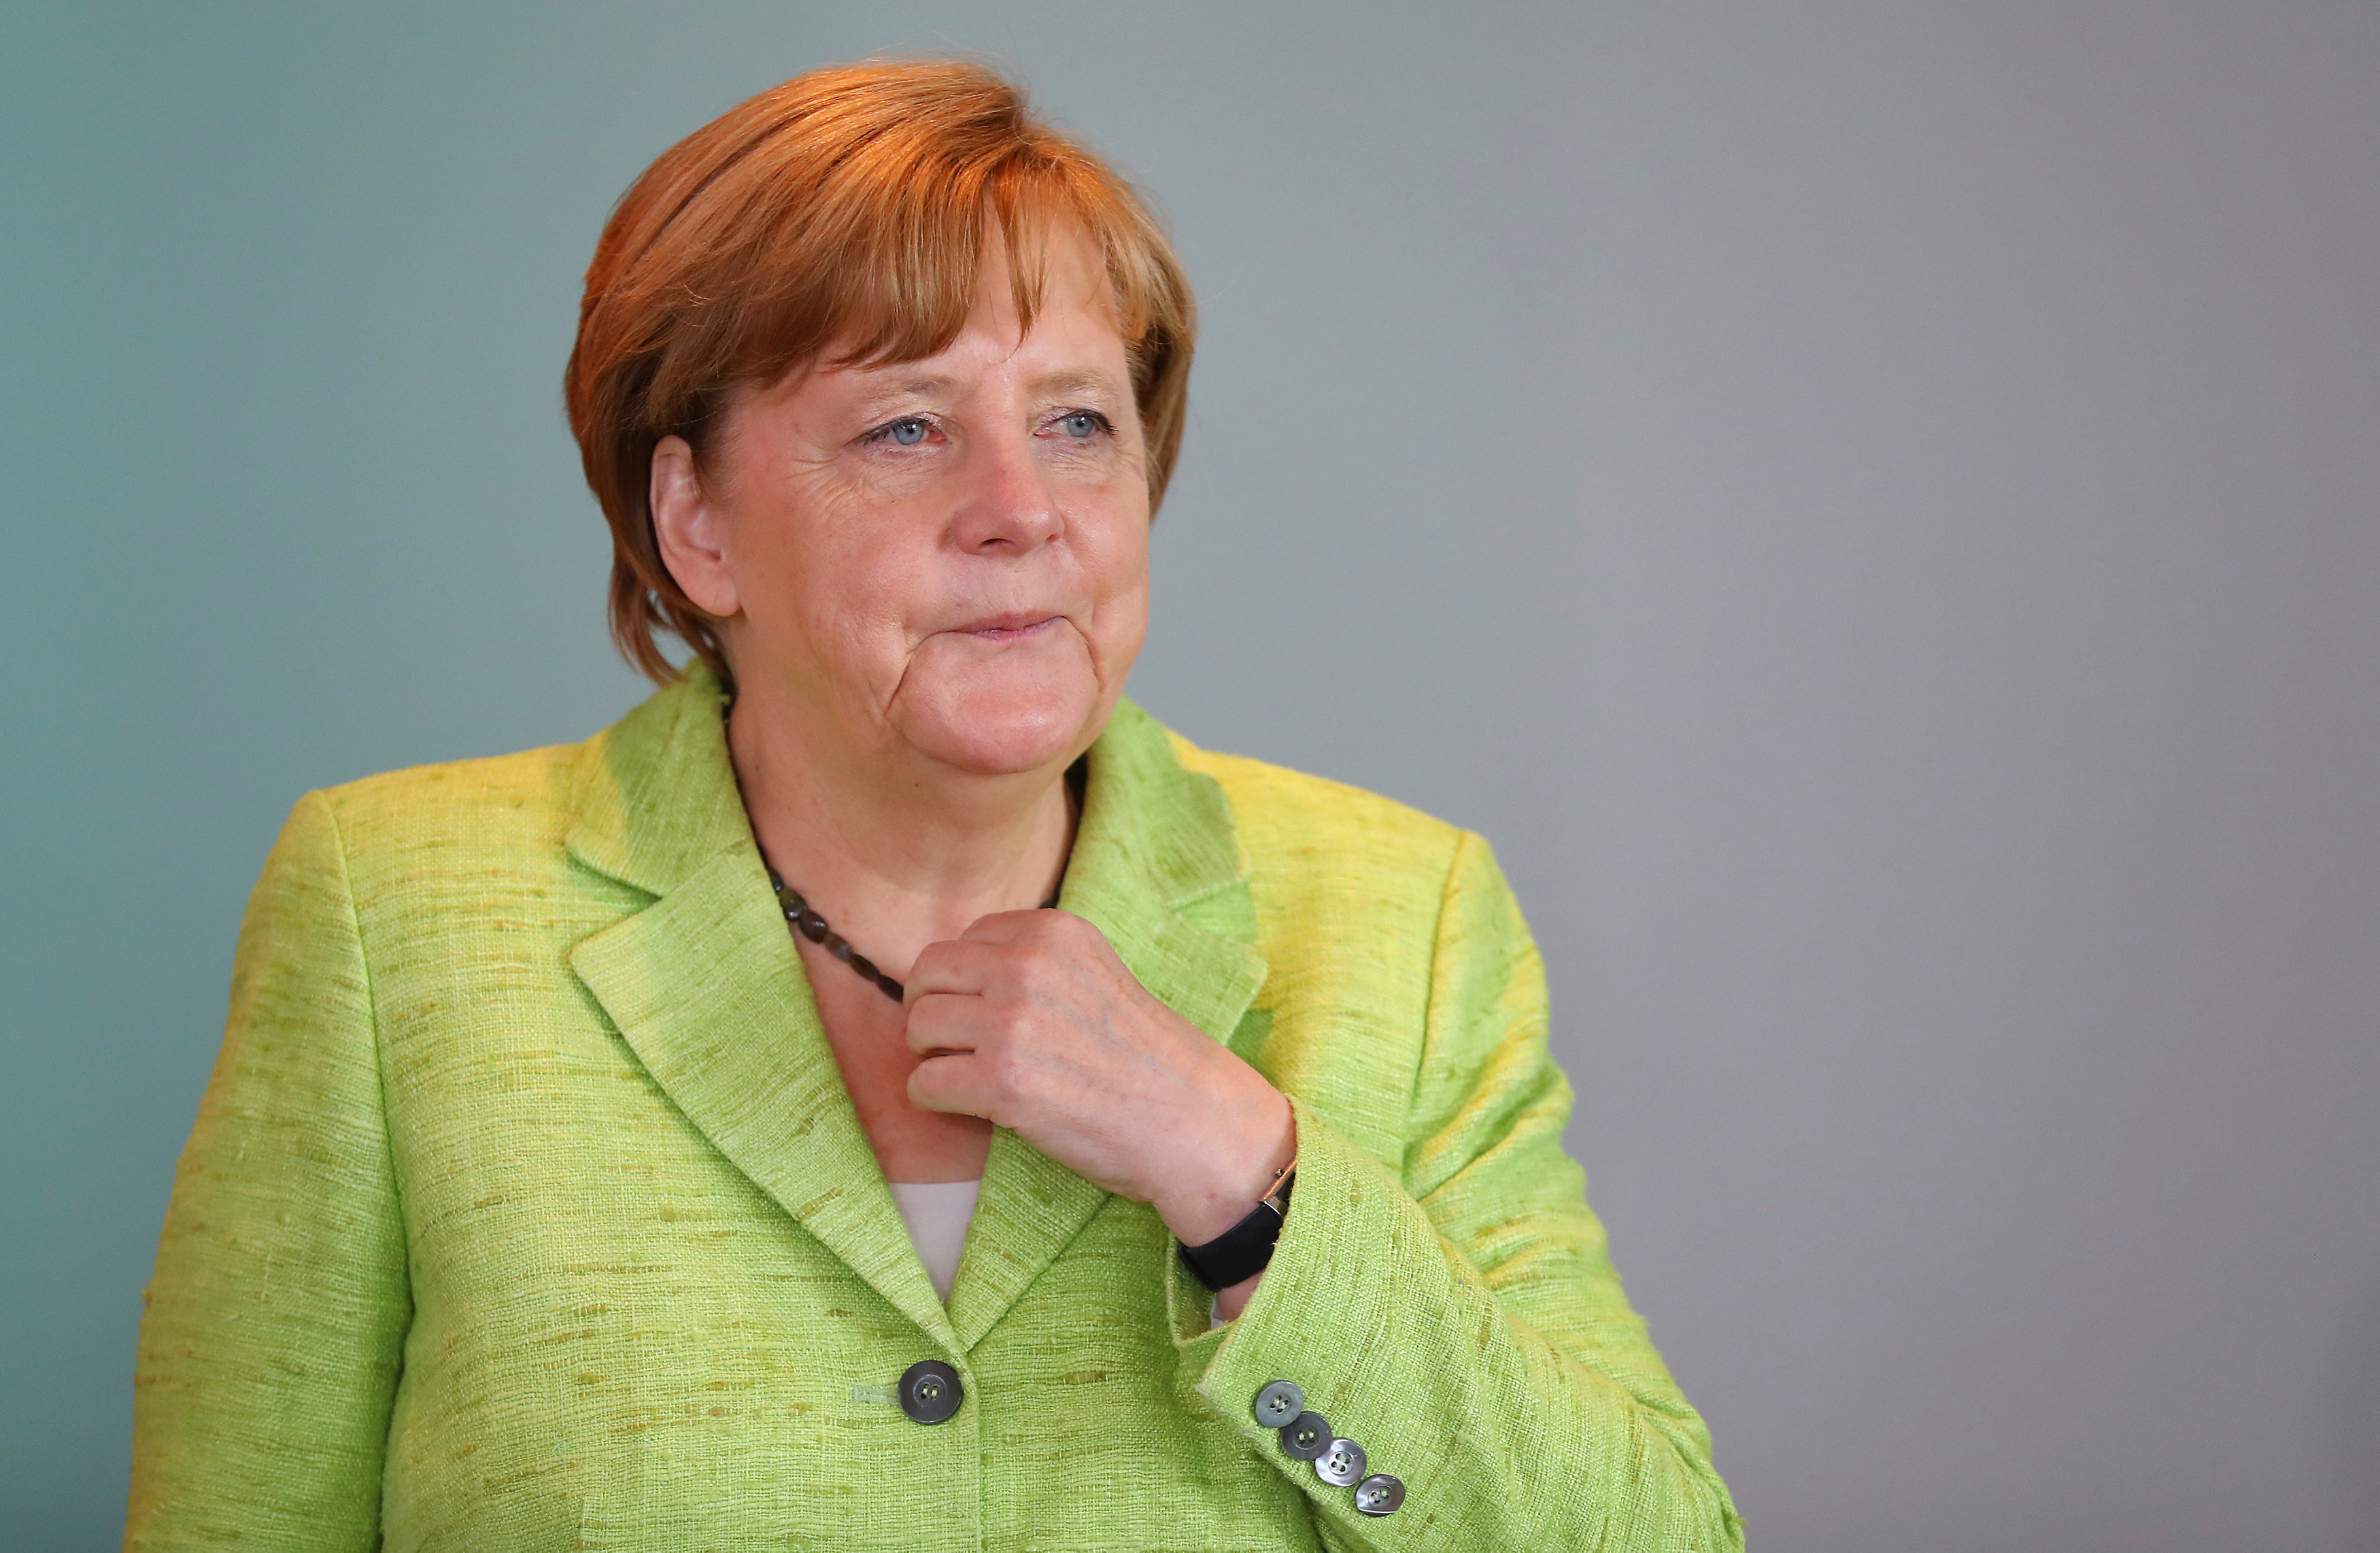 Merkel takes holiday break during poll campaign